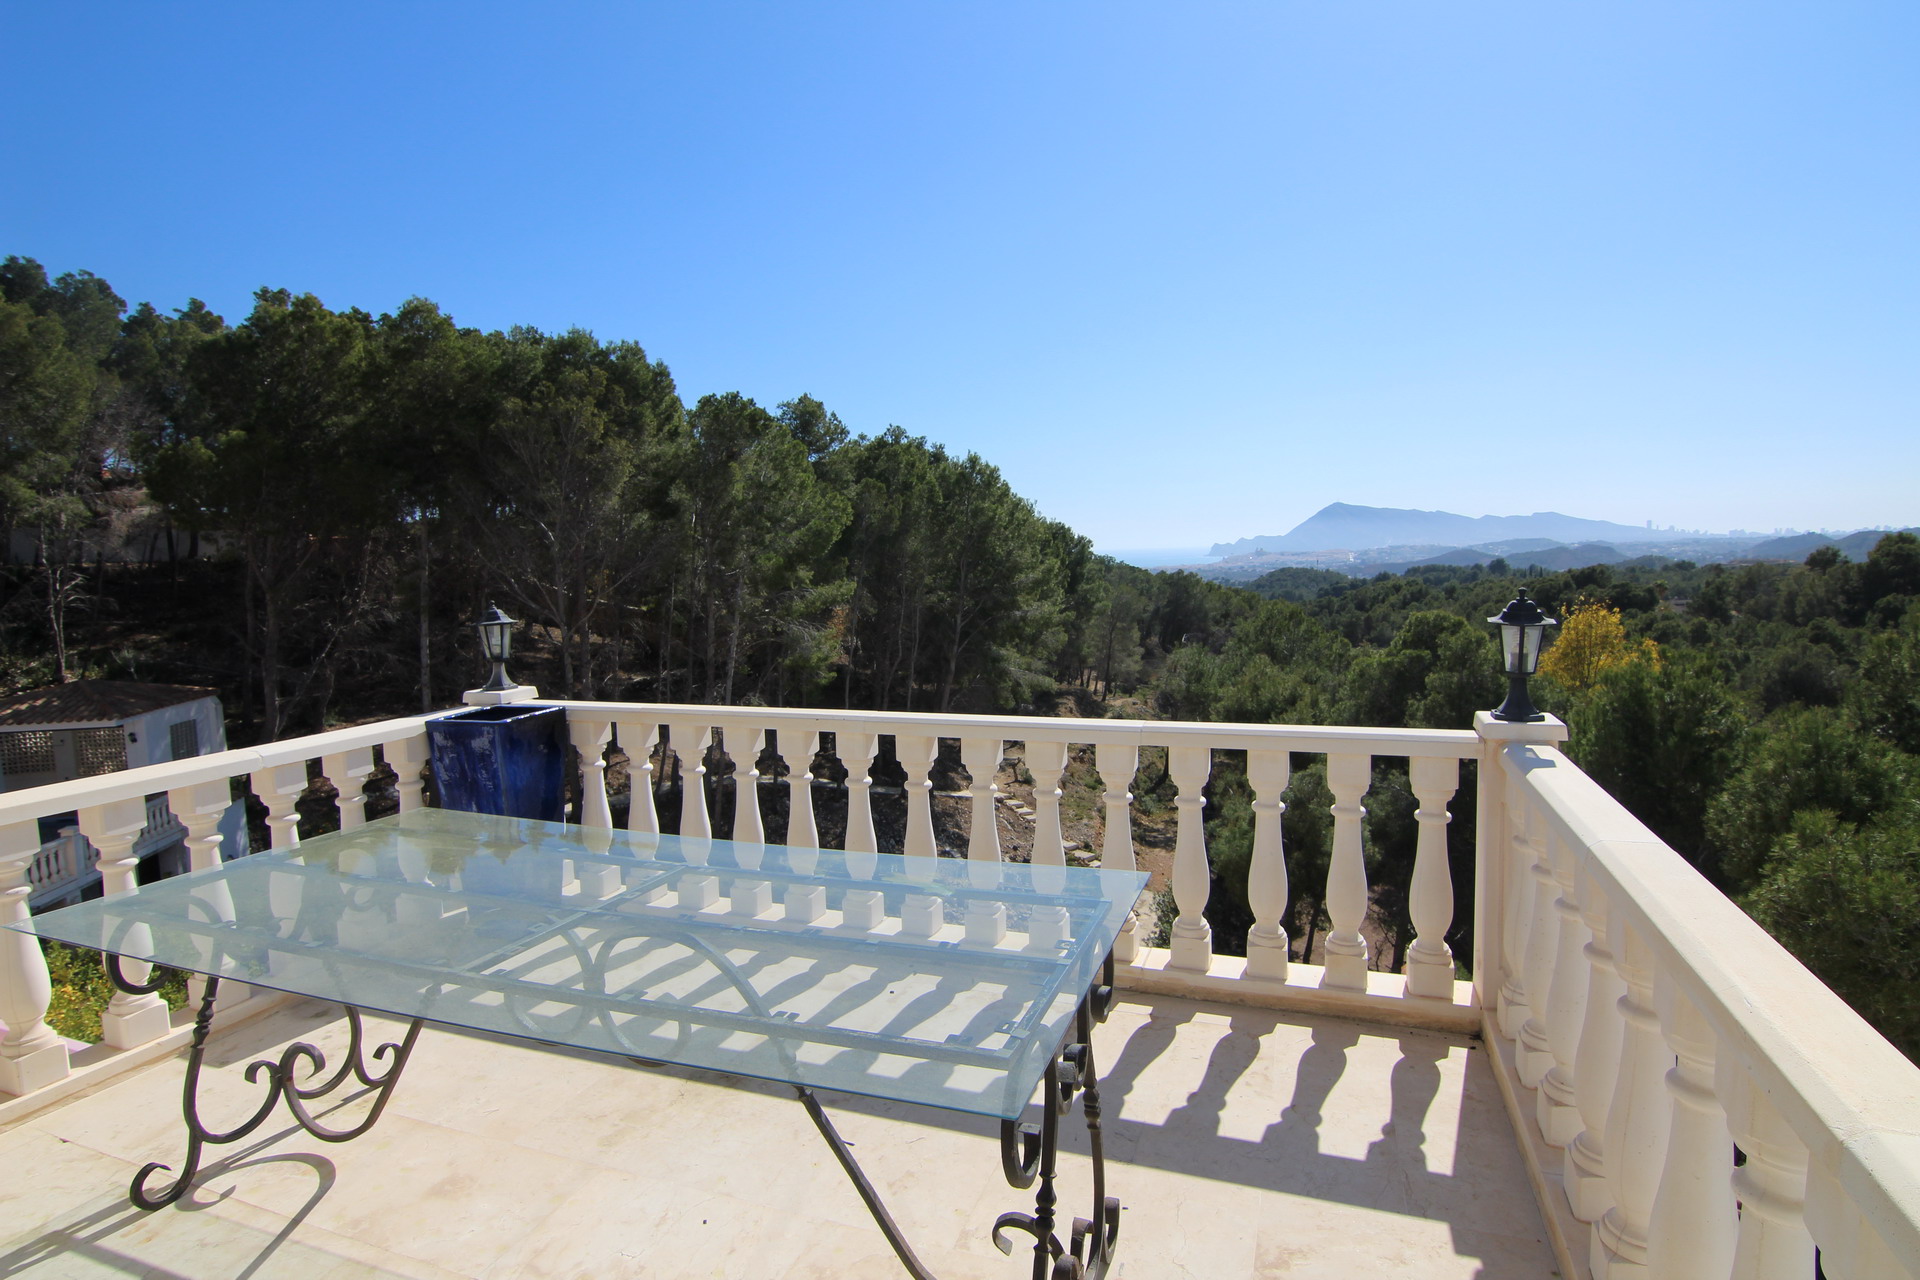 Villa for sale with panoramic views in Altea Costa Blanca